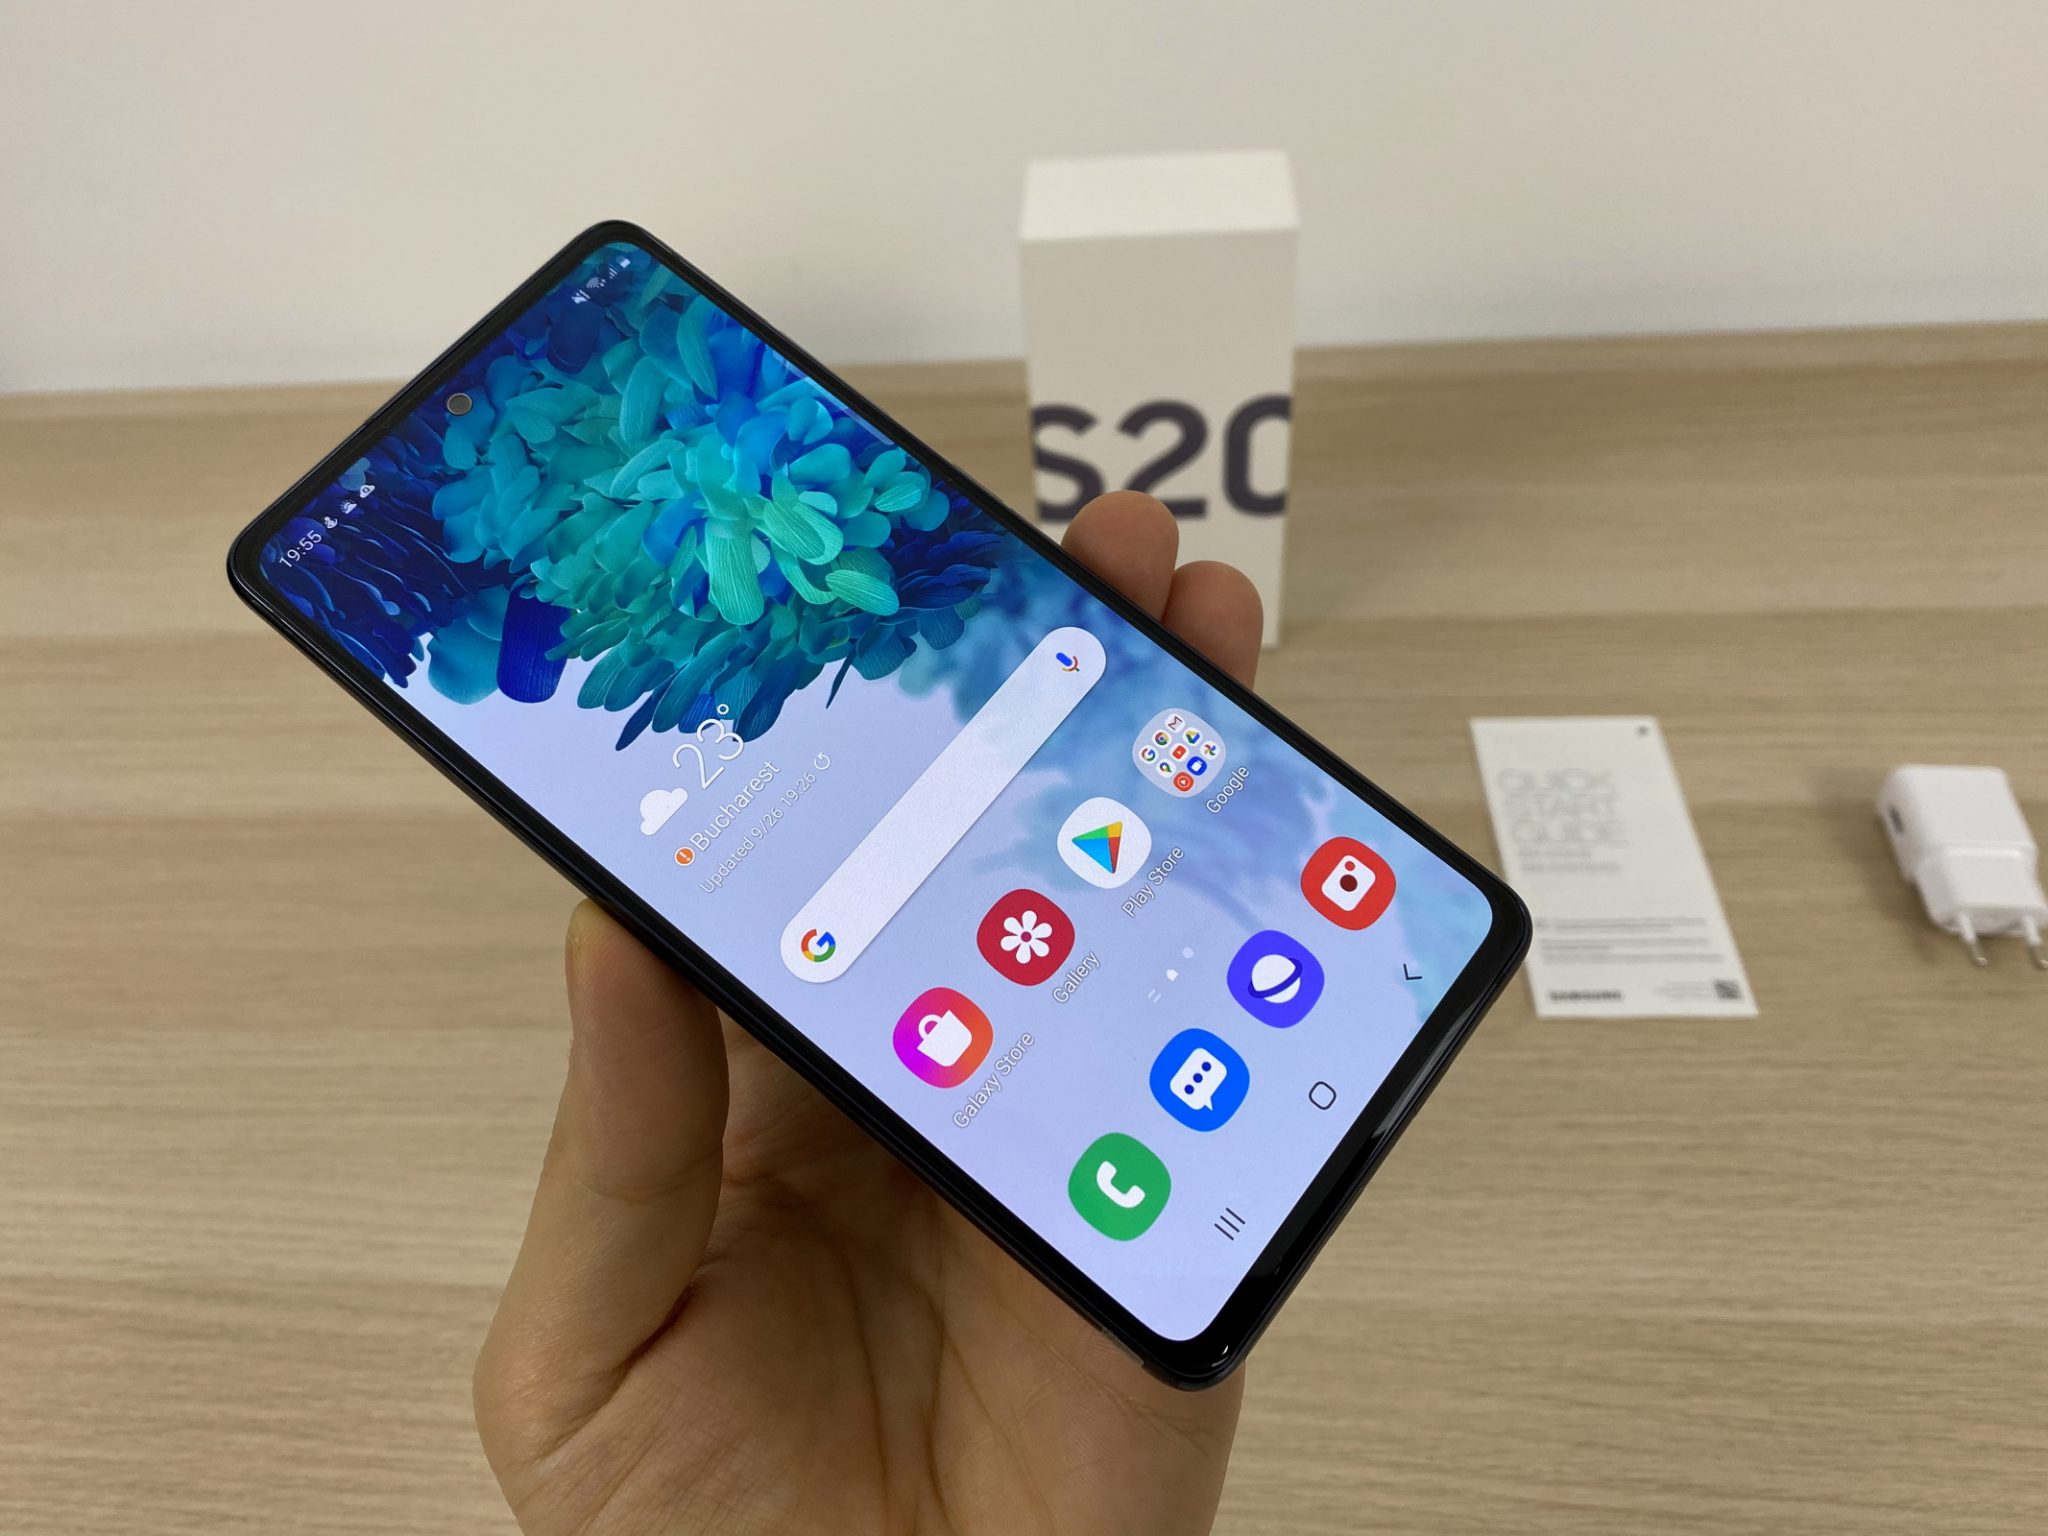 Samsung Galaxy S20 FE 5G Unboxing S20/Note 20 Hybrid Gets Snapdragon